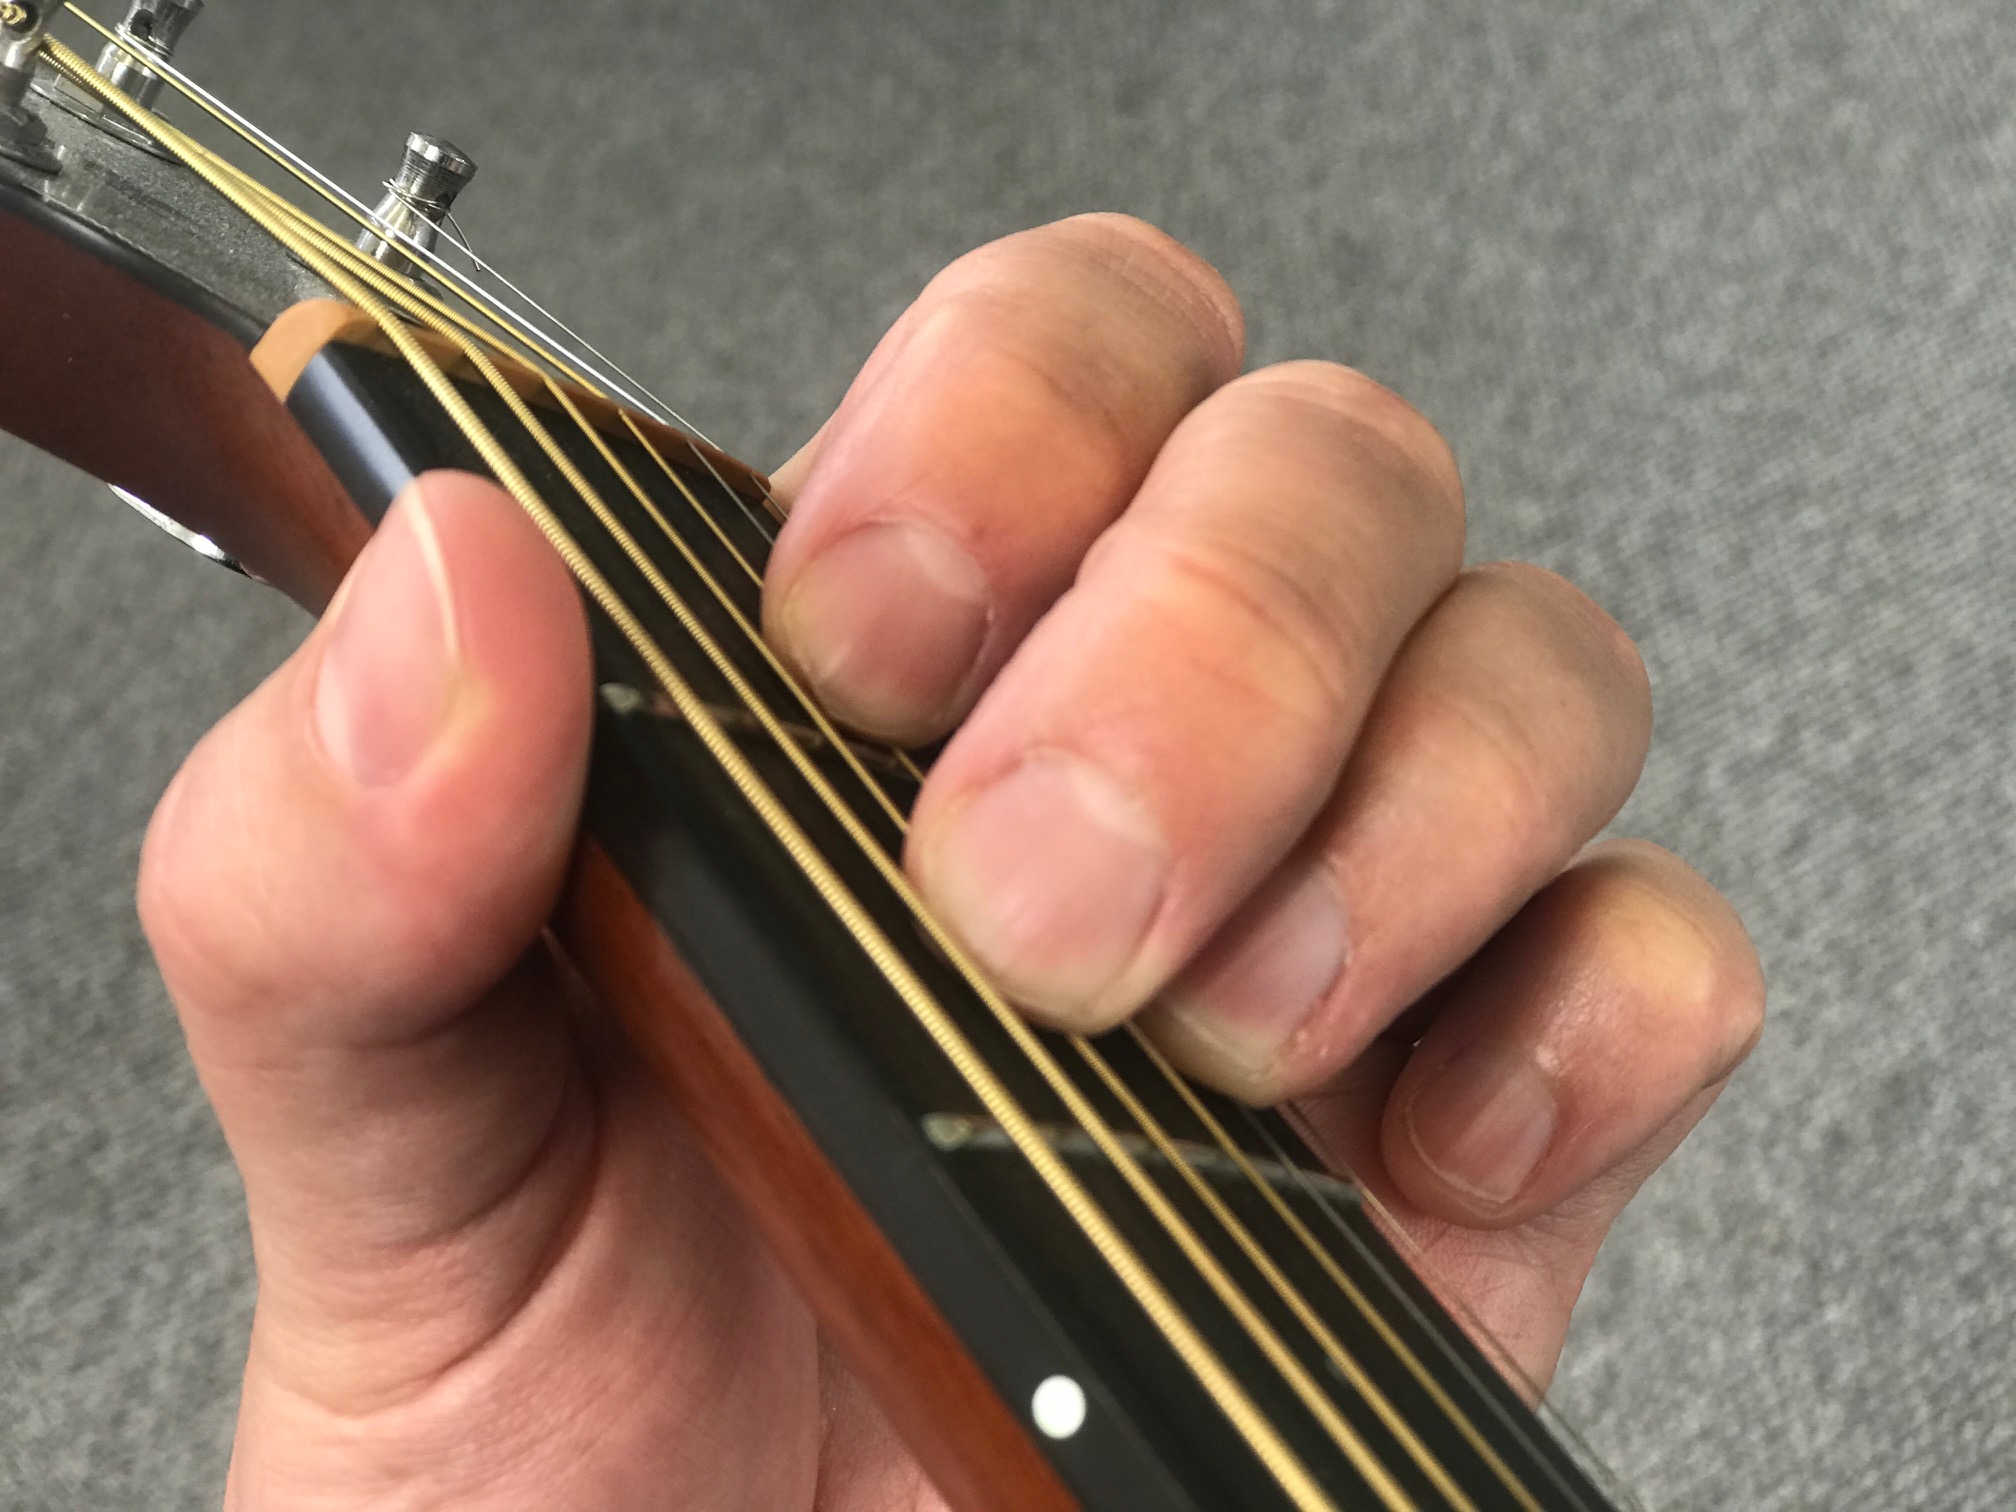 How To Play The Amaj7 Chord On Acoustic Guitar - Drue James